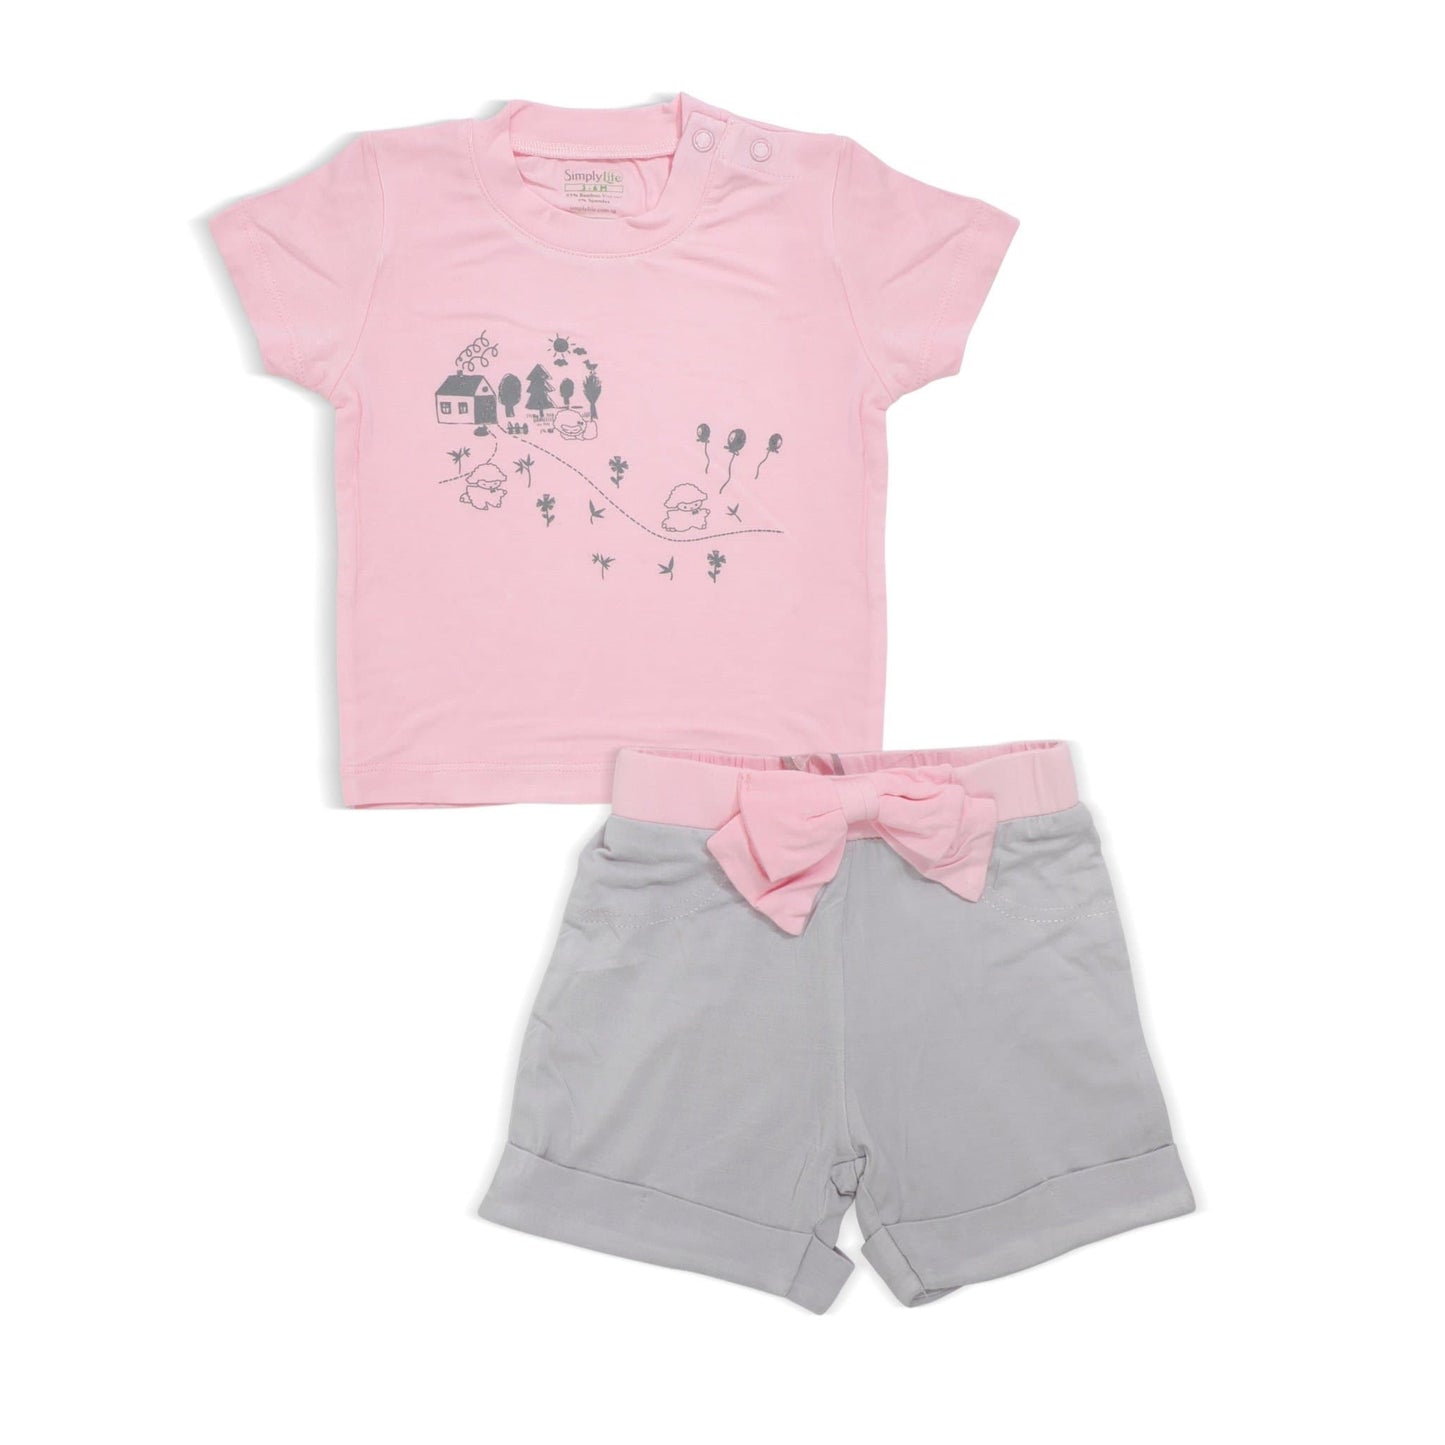 Adorable Lamb - Shorts & Tee set by simplylifebaby